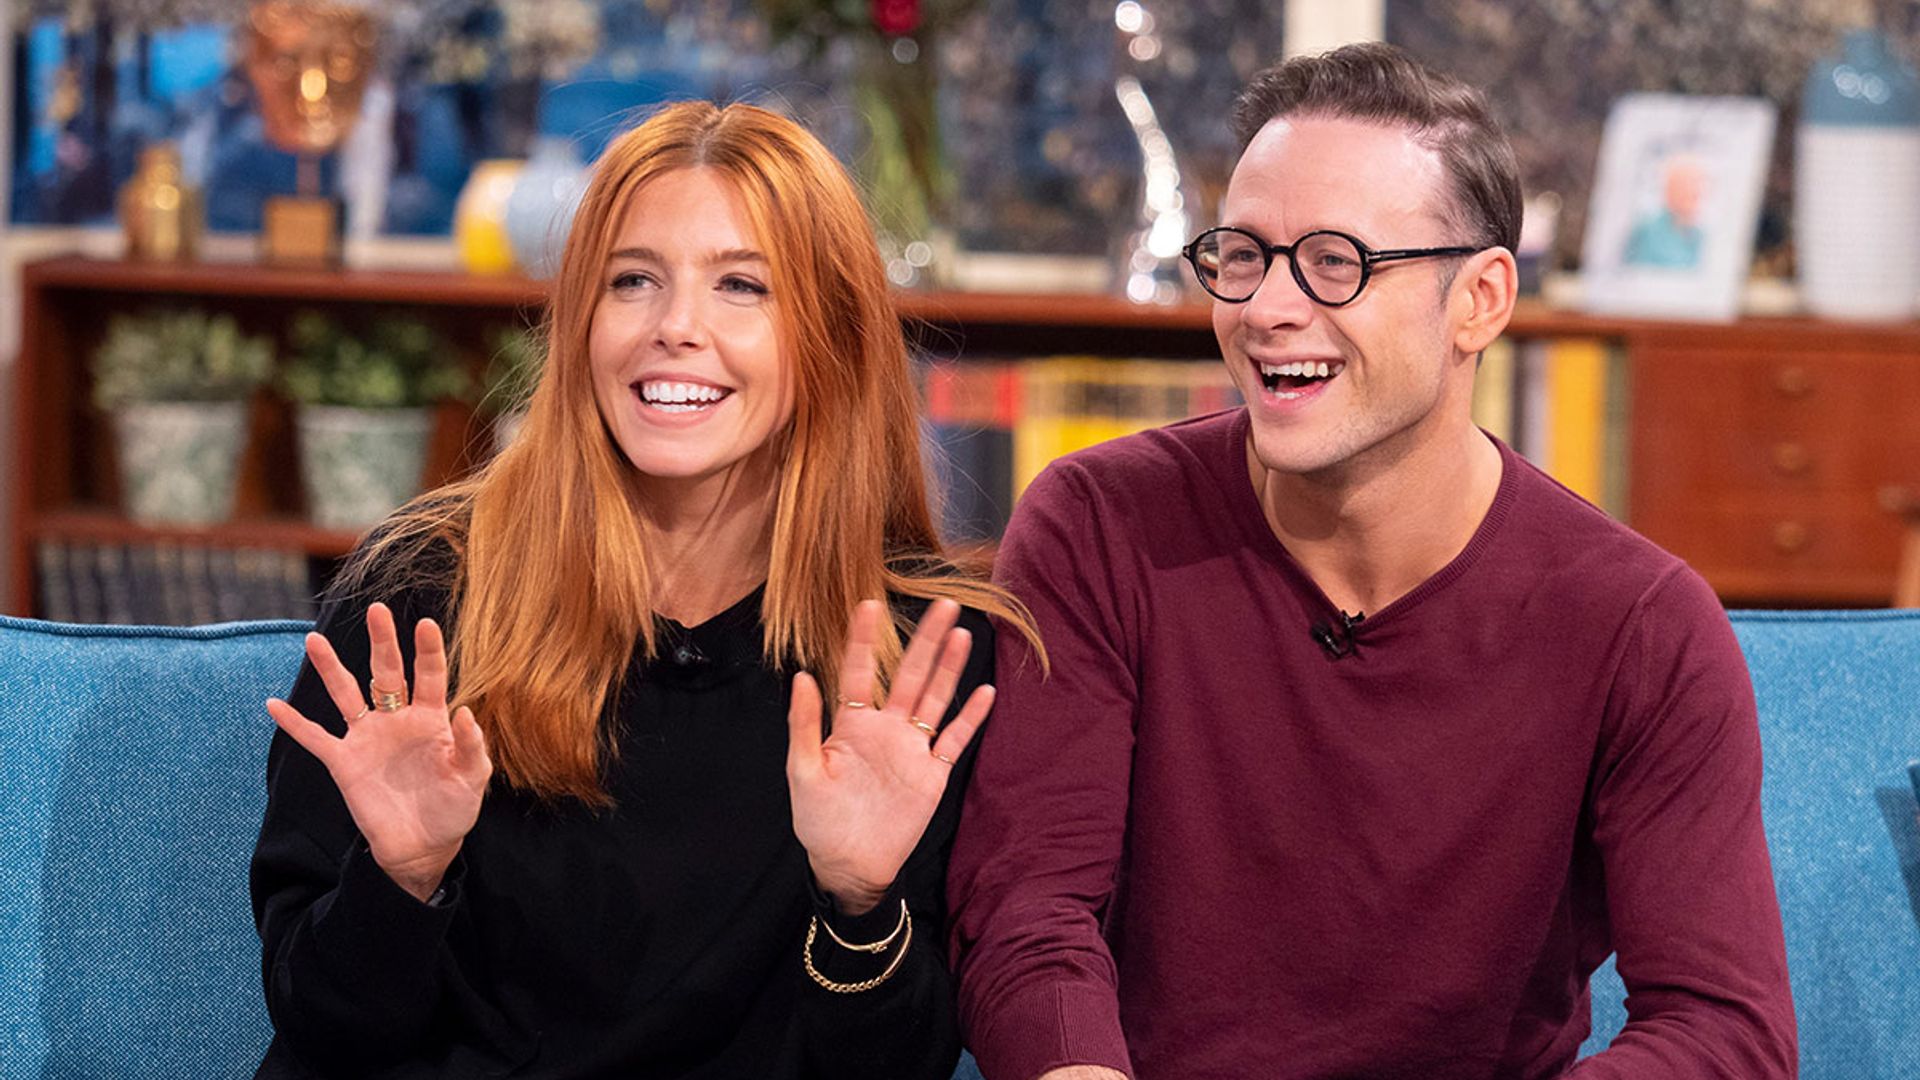 Stacey Dooley's very unusual bedside table accessory revealed